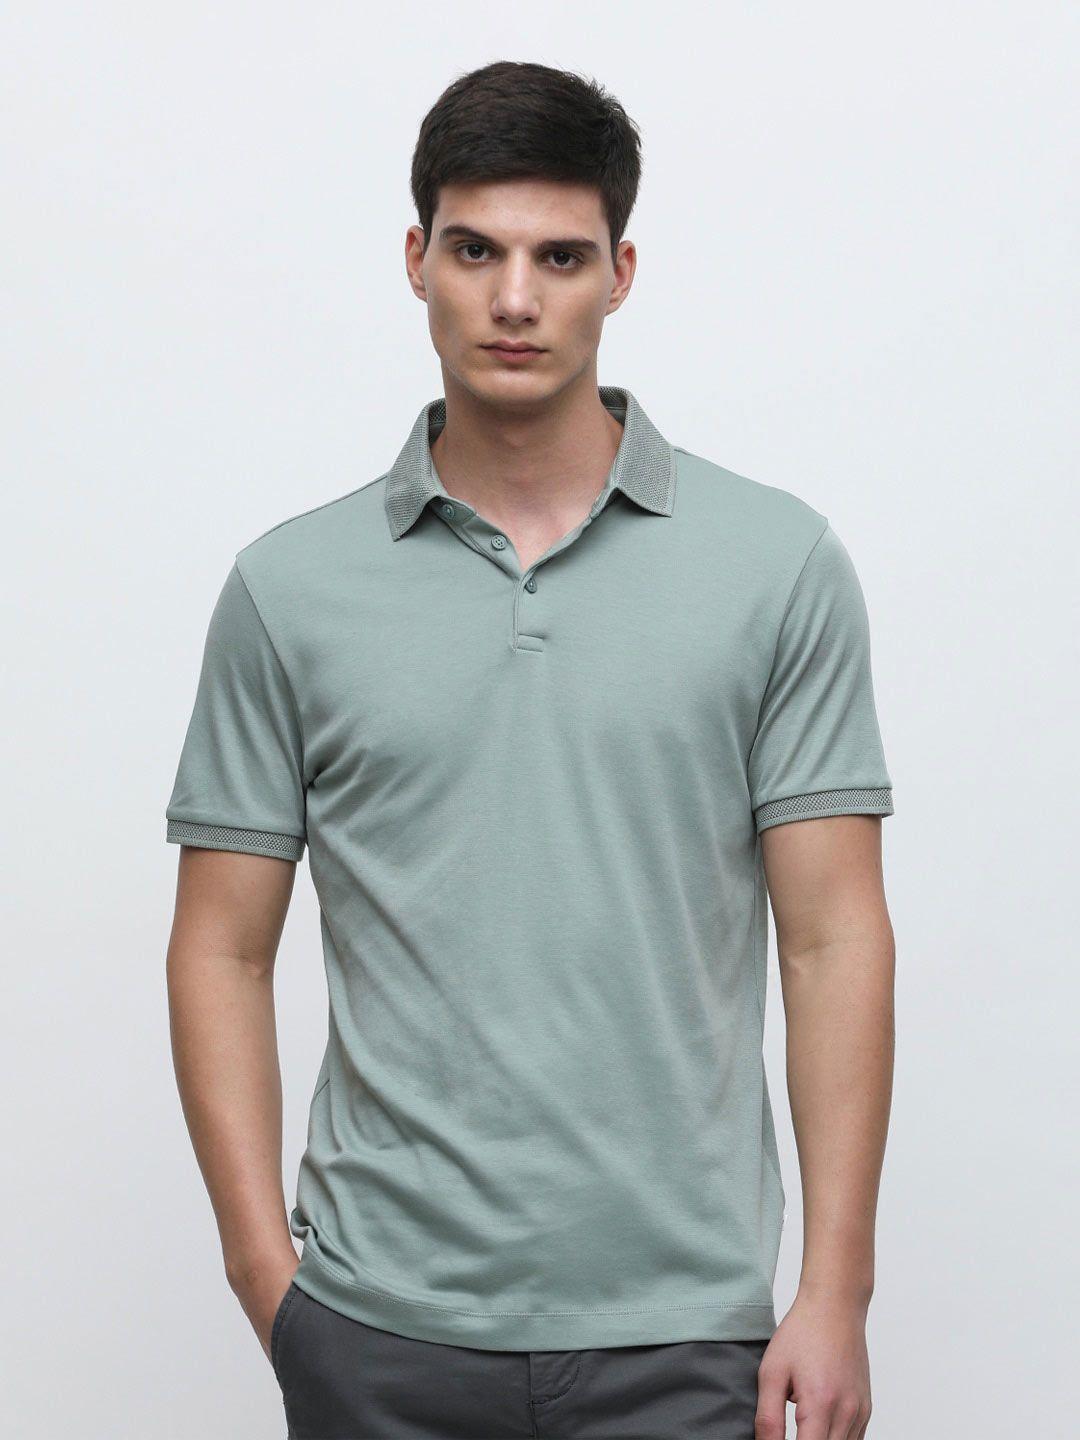 selected polo collar slim fit pure cotton t-shirt